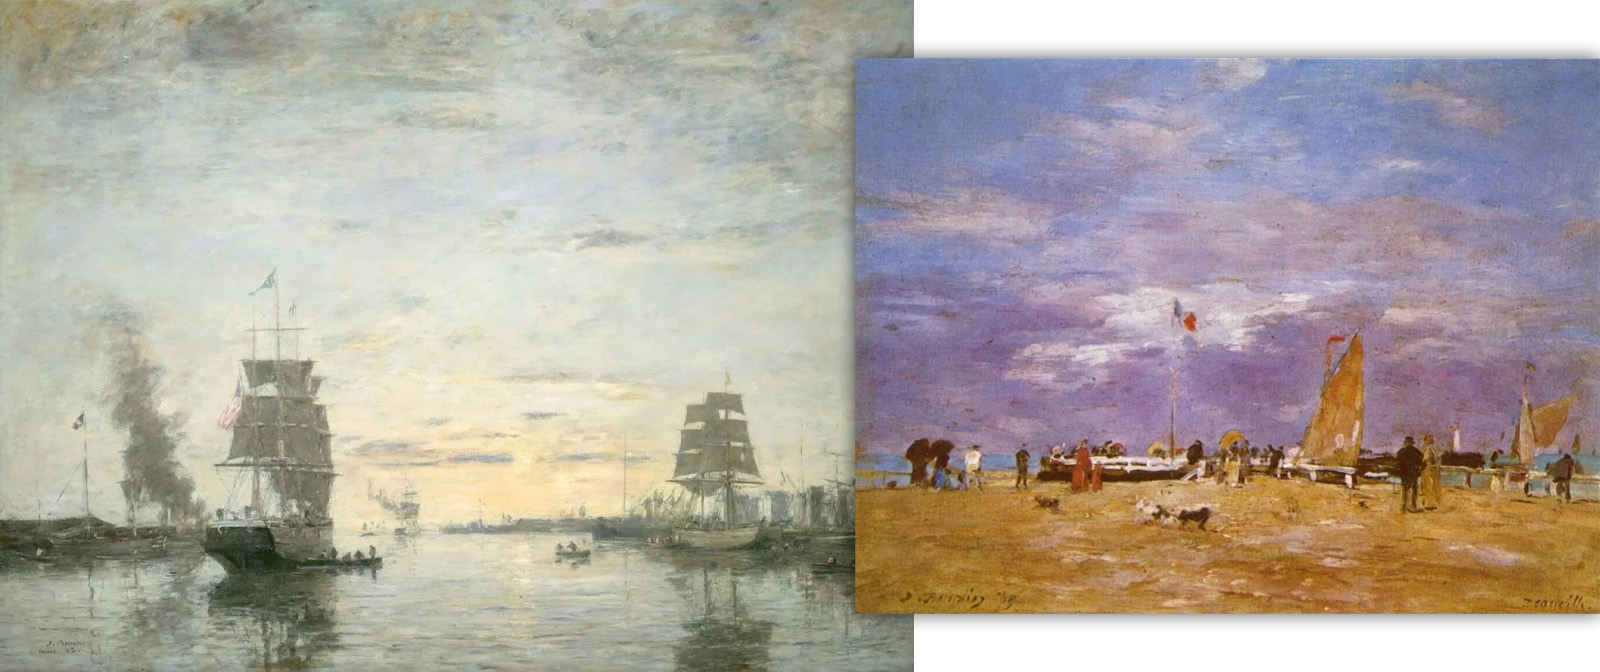 "French Aivazovsky" Éugene Boudin, whose paintings are much more than meets the eye